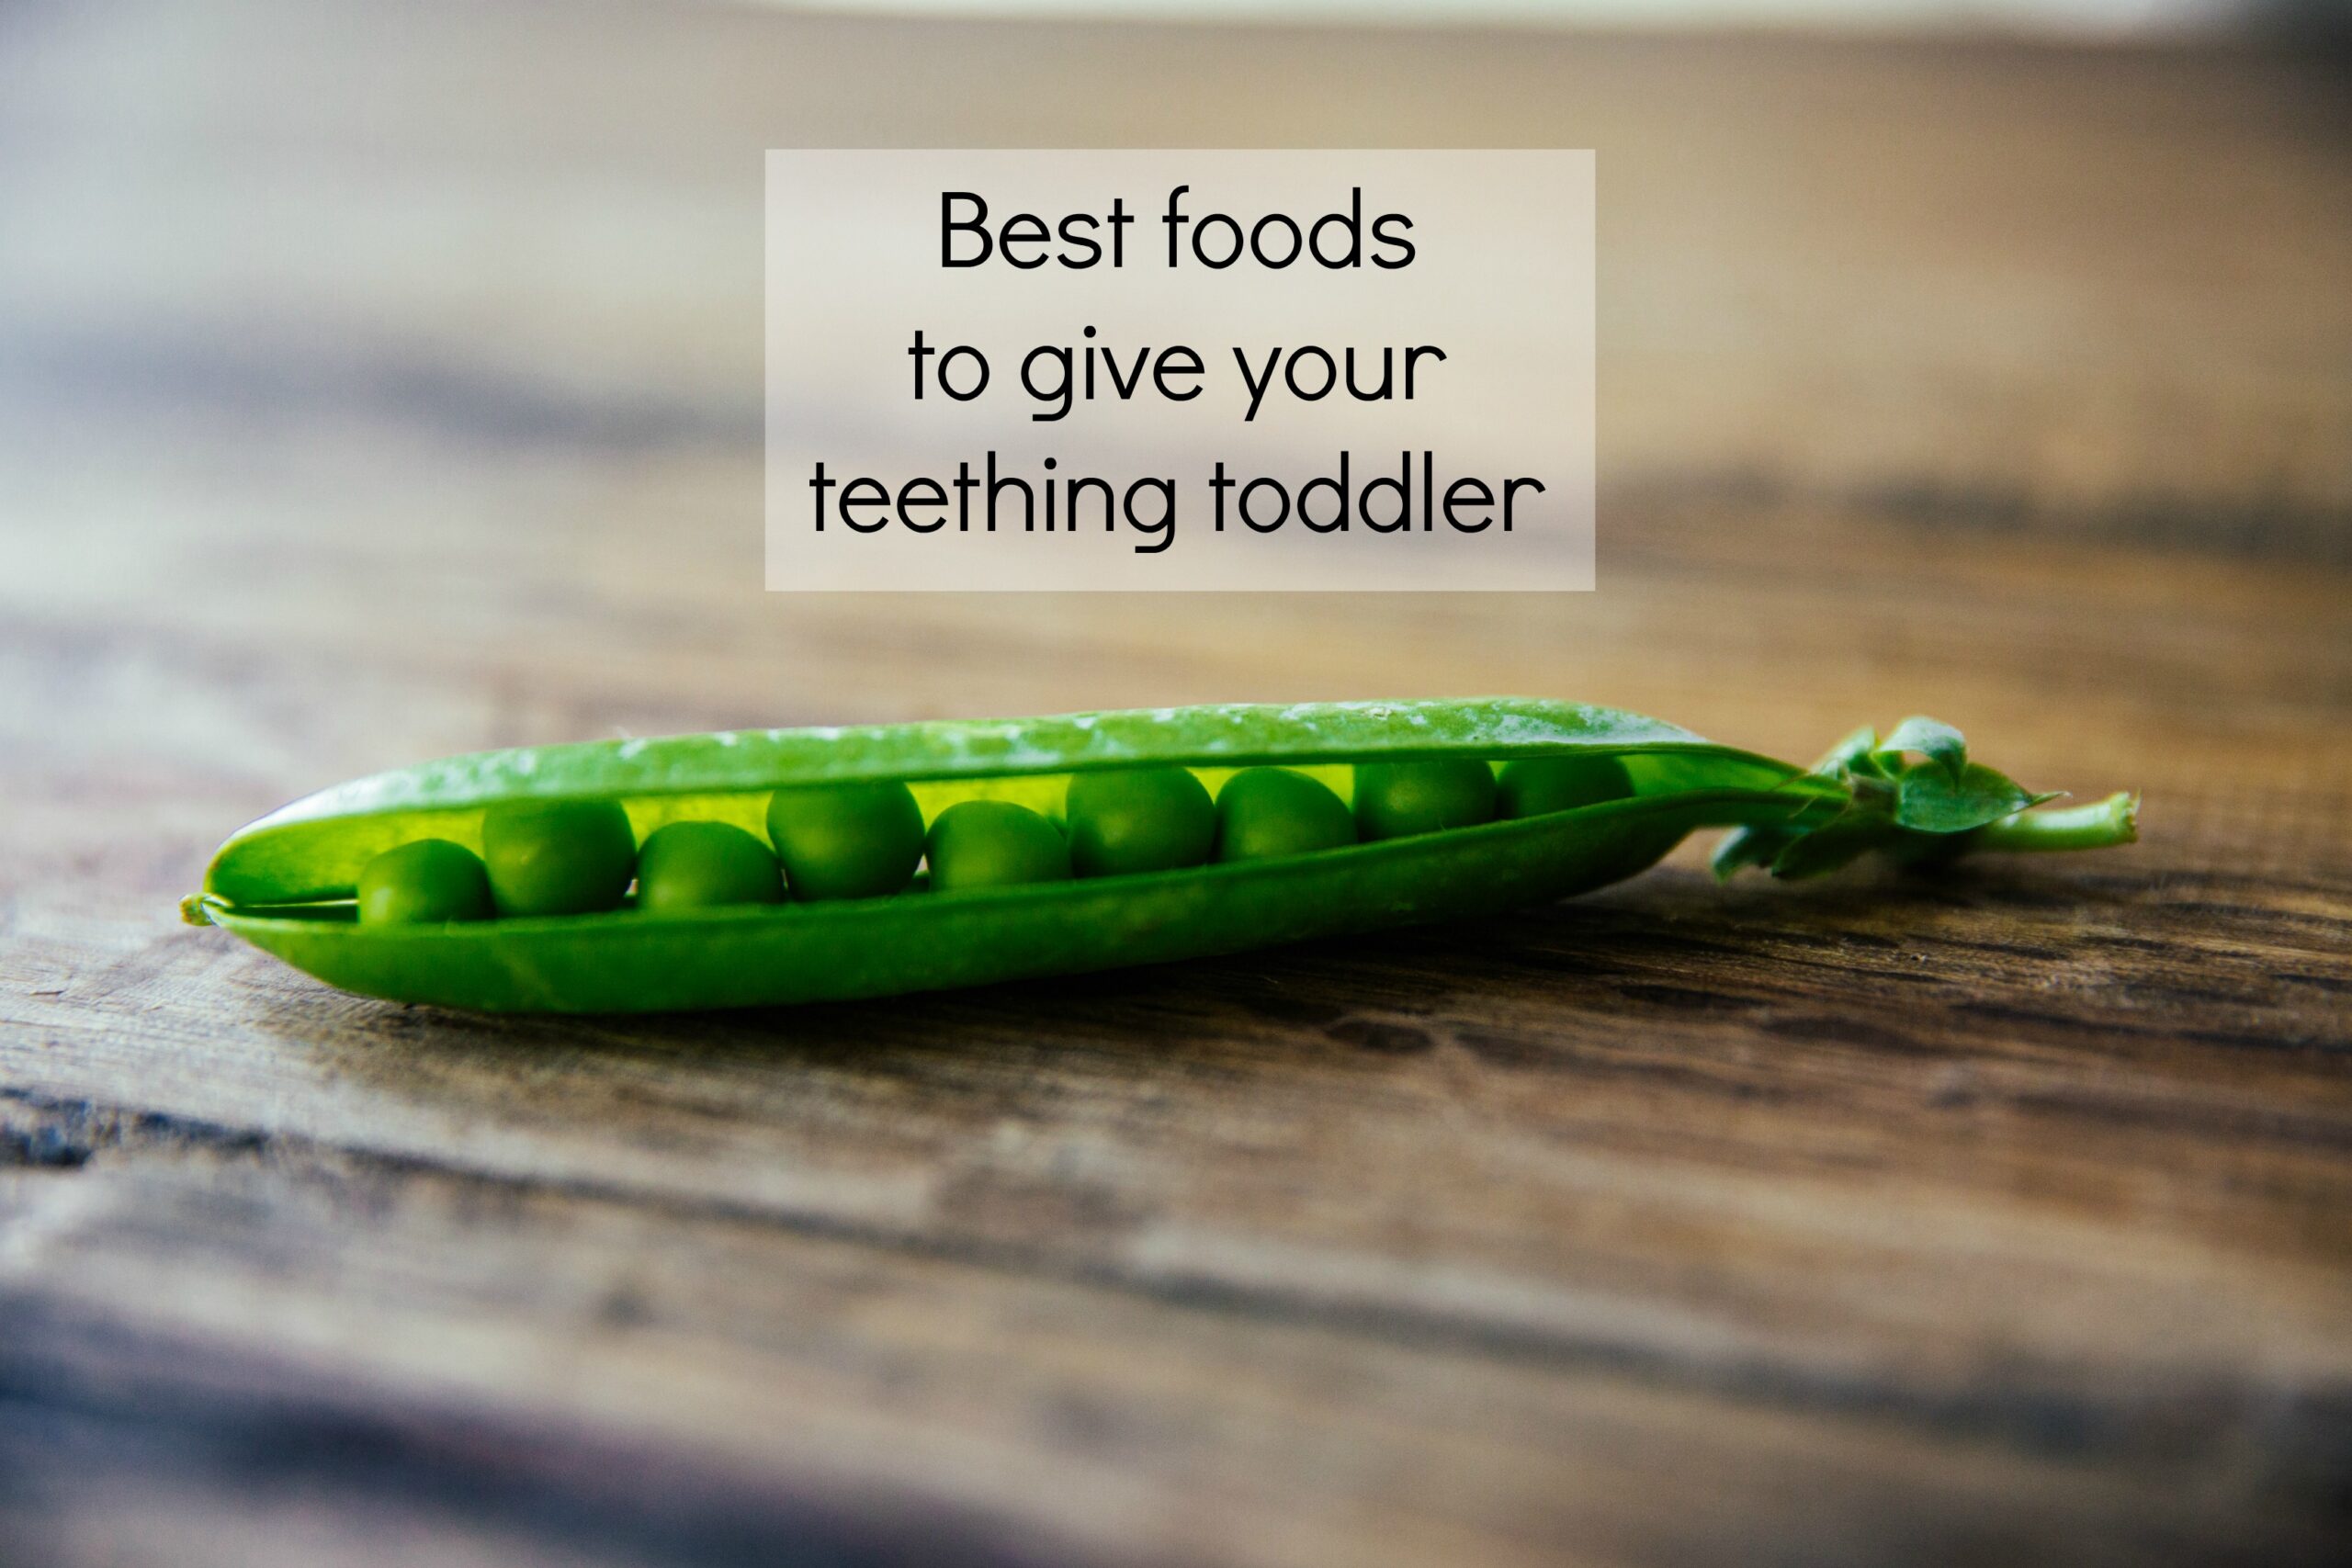 Best foods to give your teething toddler